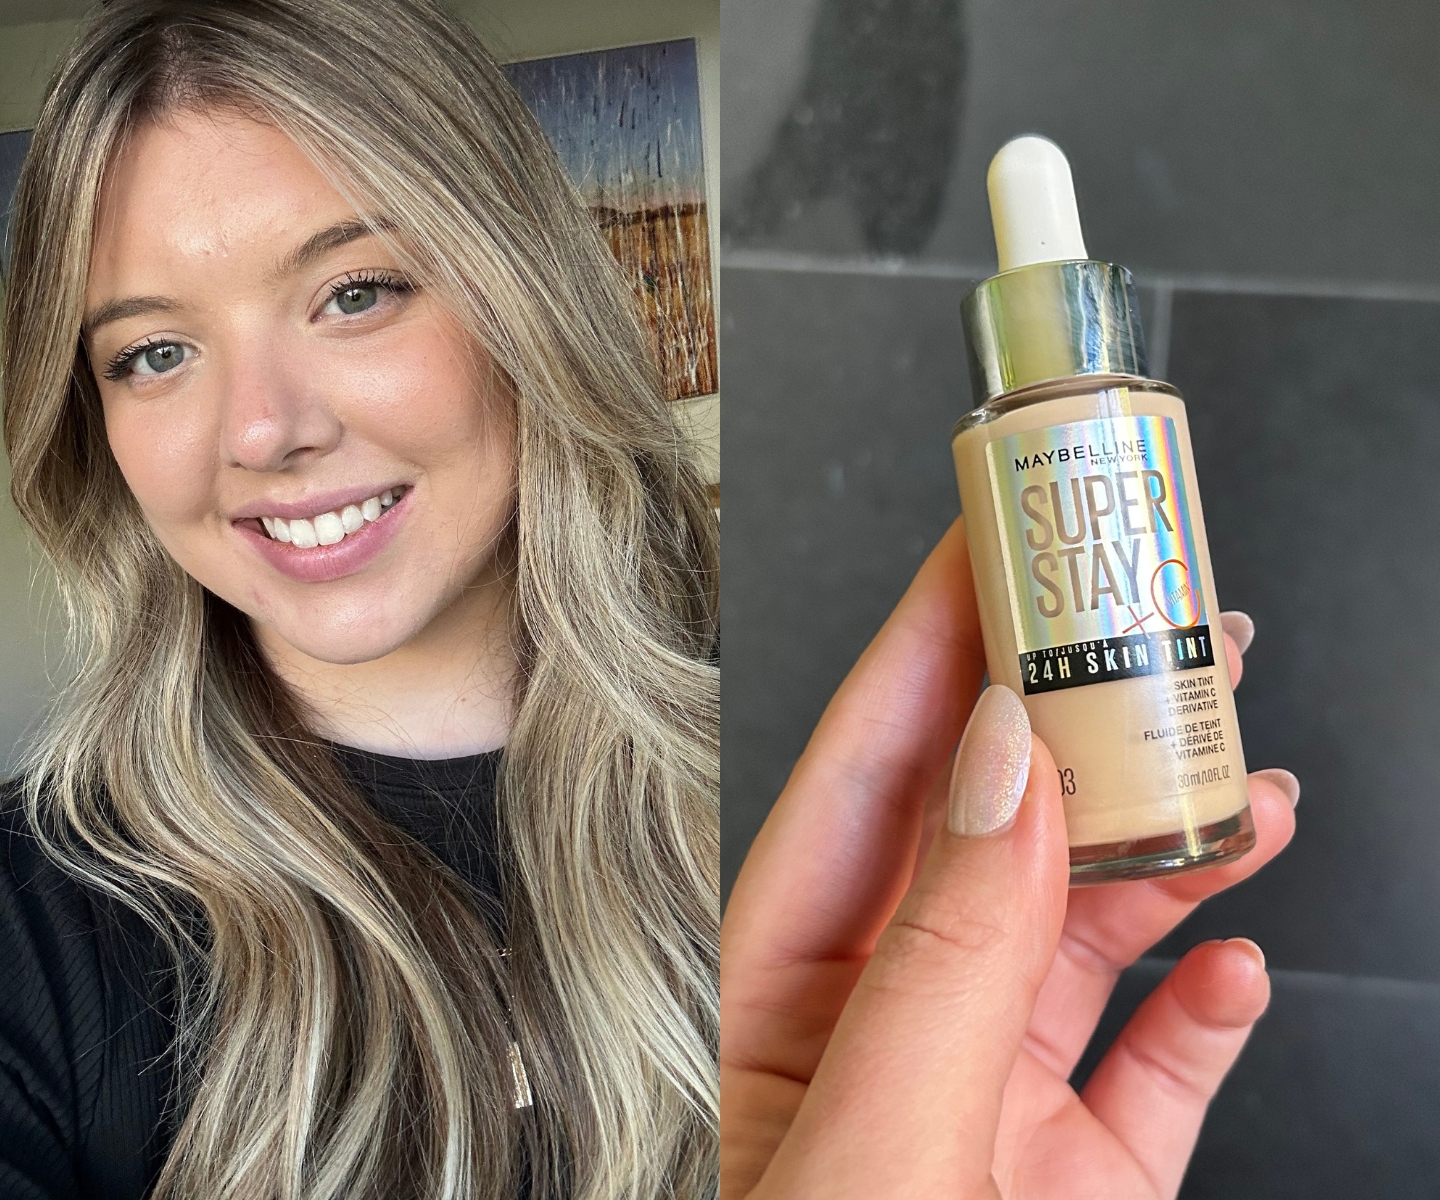 new* MAYBELLINE SUPERSTAY 24H SKIN TINT REVIEW + 12HR WEAR TEST